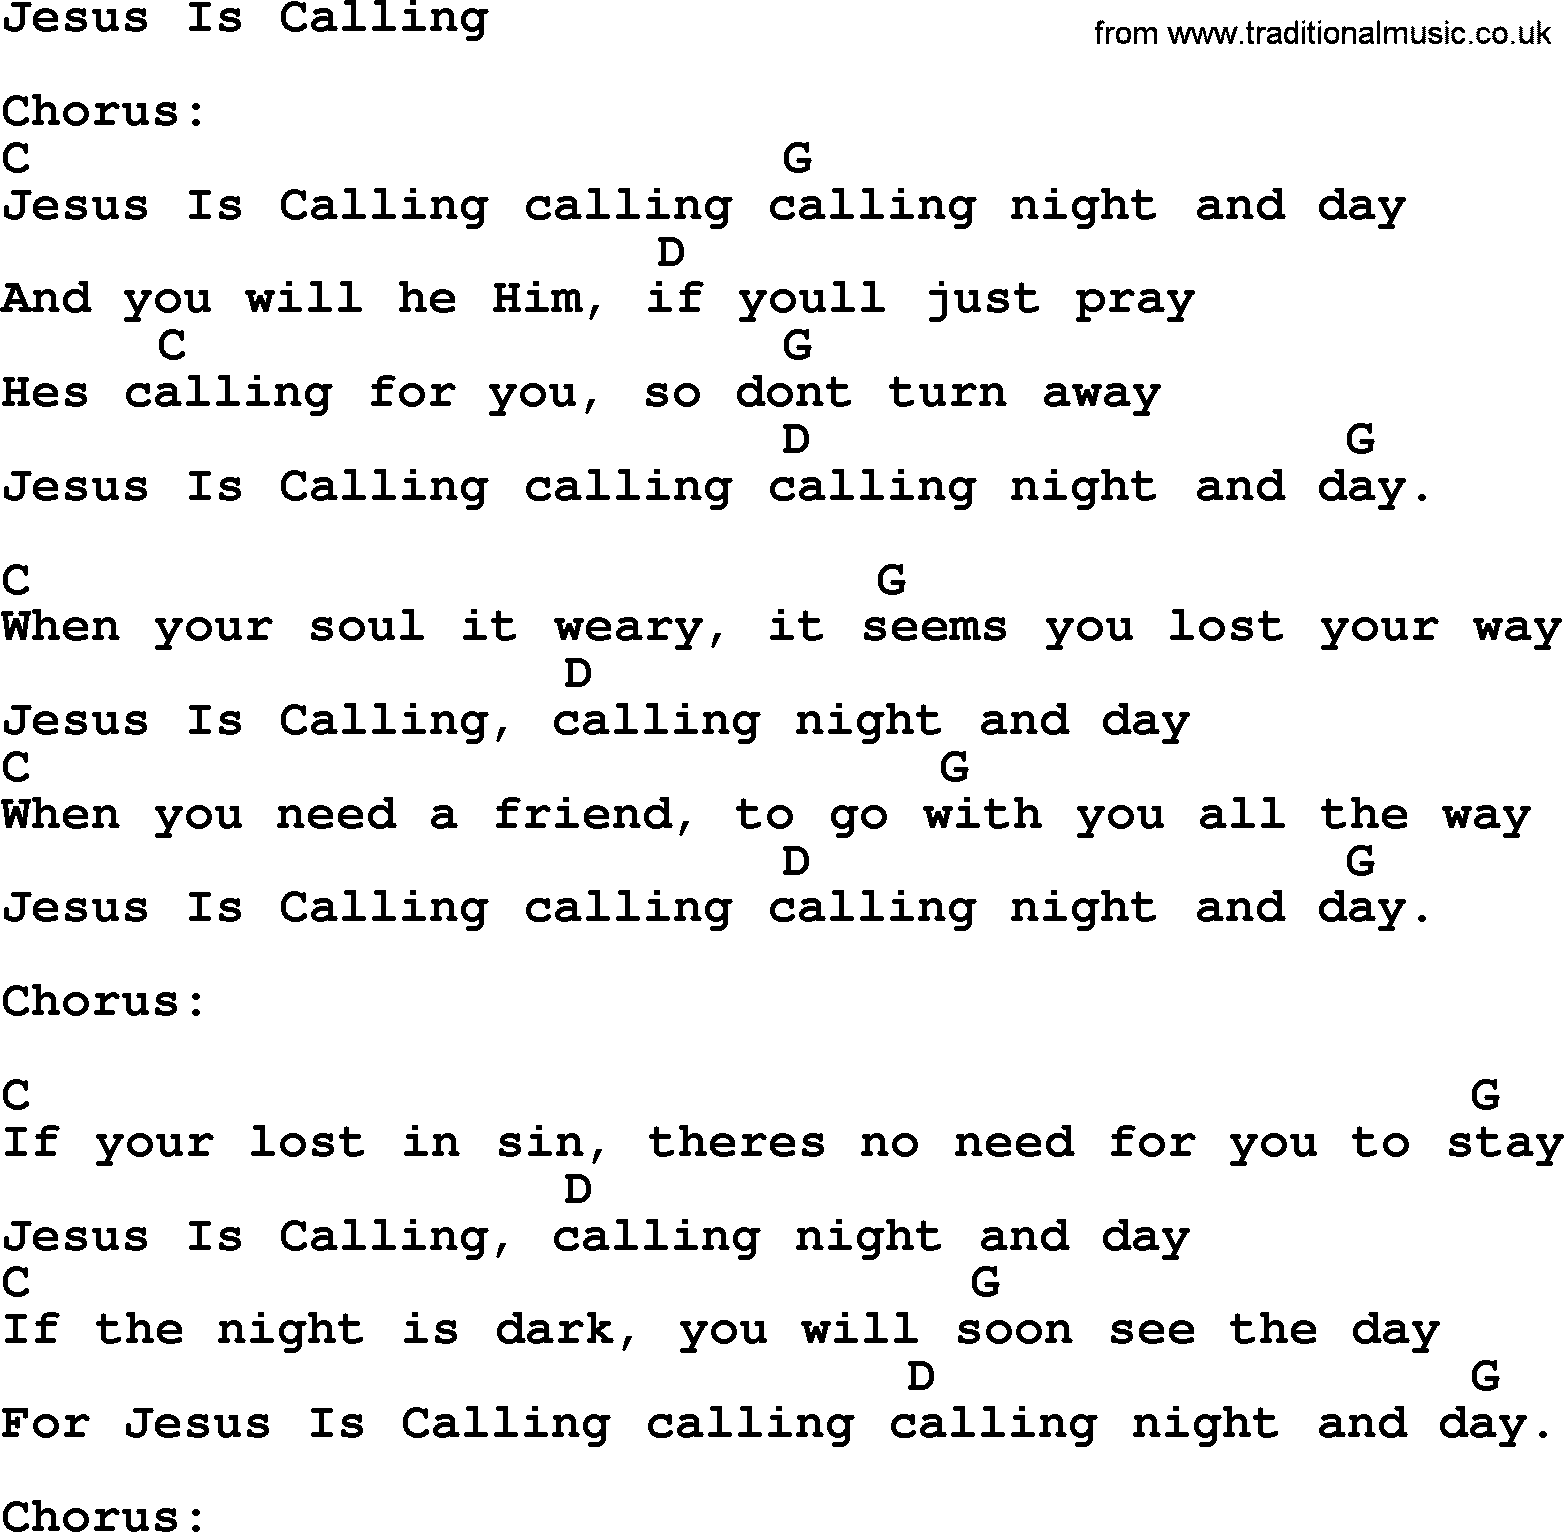 Hank Williams song Jesus Is Calling, lyrics and chords